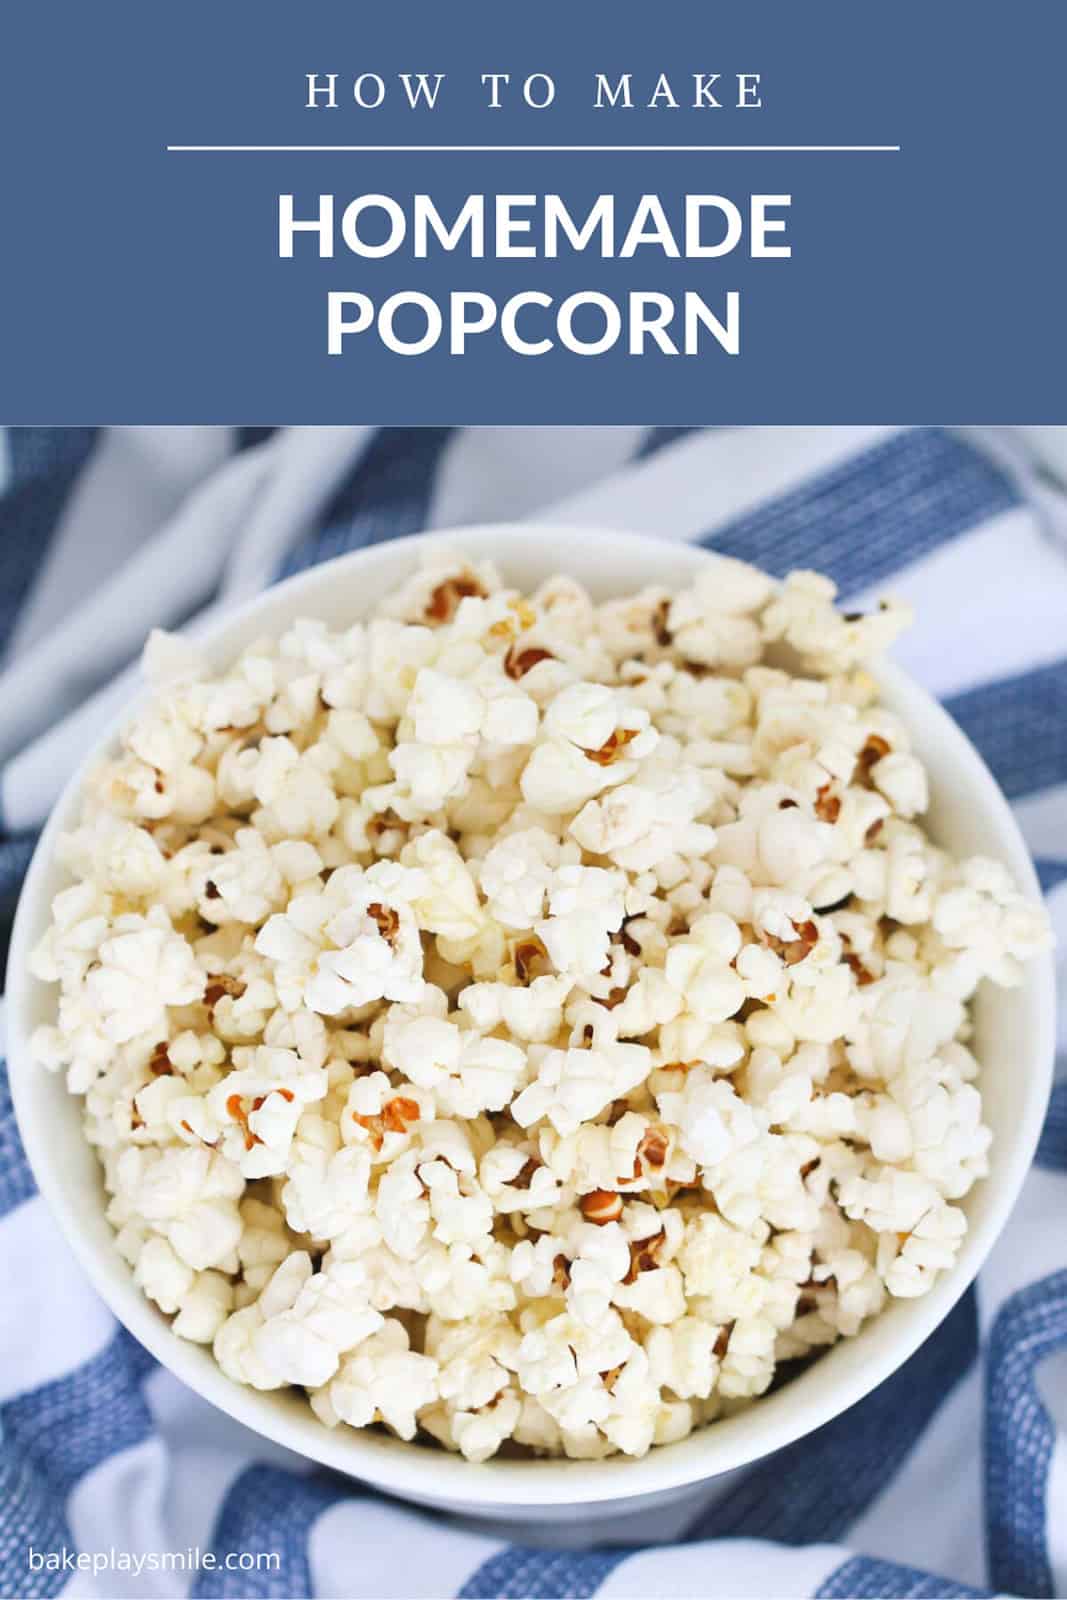 A bowl of popcorn sitting on a blue and white tea towel